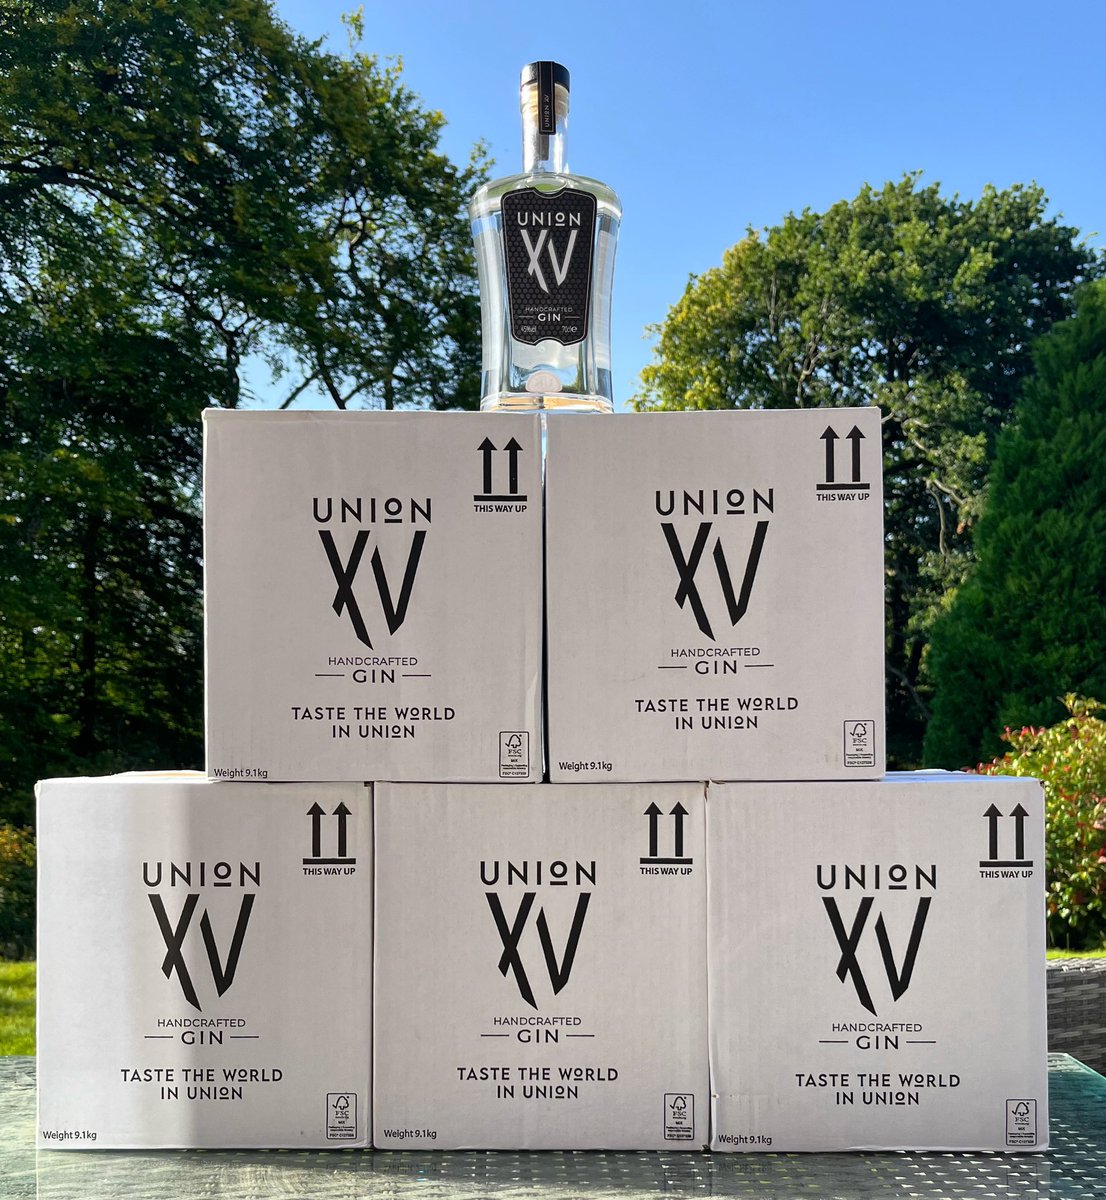 Union XV is now available by the case of 6 x 70cl!

⭐ A fantastic product to champion the Rugby World Cup ⭐ 

Trade enquiries are now welcome, please use the mail below for more details

Enquiries@unionxv.com 

#gin #ontrade #rugbyworldcup2023